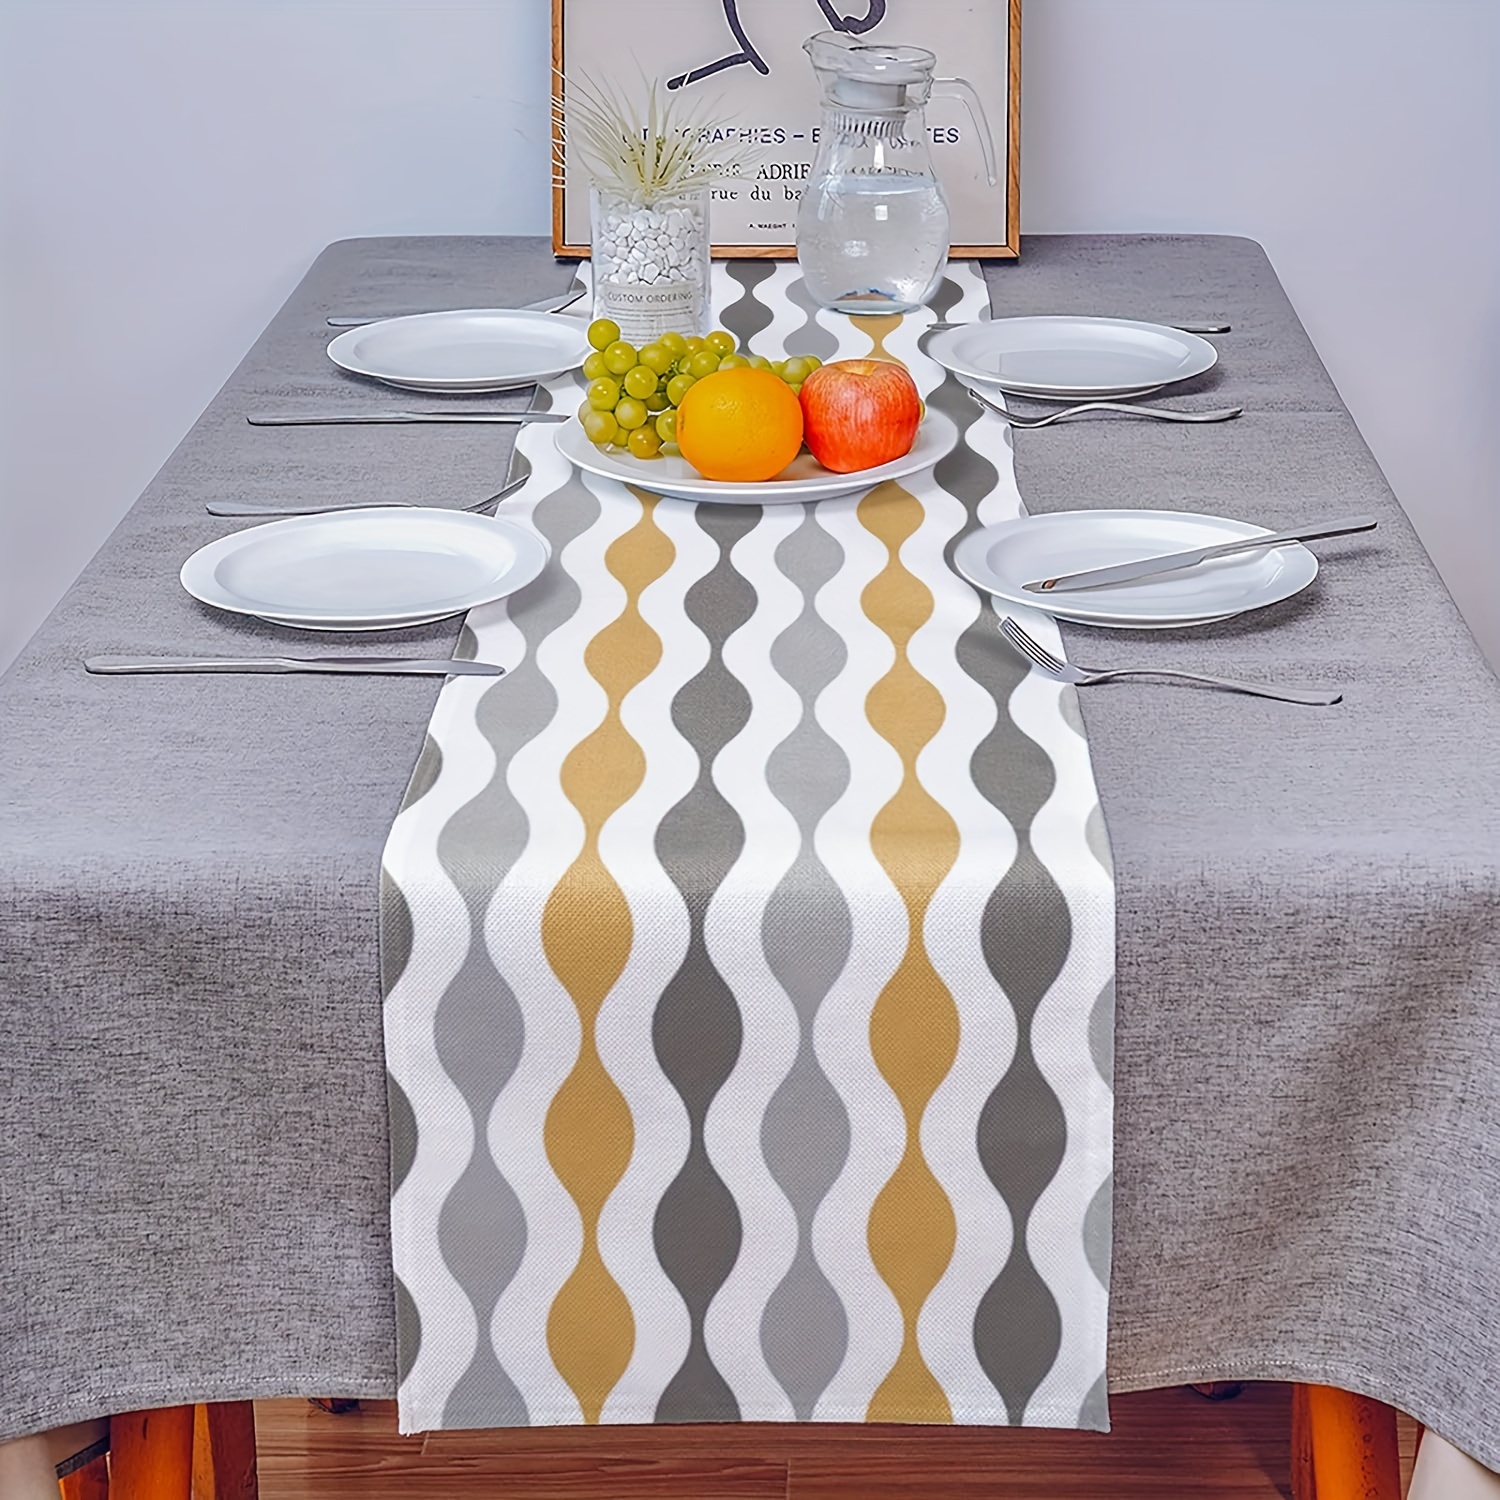 

1pc, Linen Table Runner, Mid-century Modern Geometric Yellow & Gray Pattern, Washable, Dresser Scarf, Fabric Table Decor For Farmhouse Home Kitchen, Wedding Party Decor